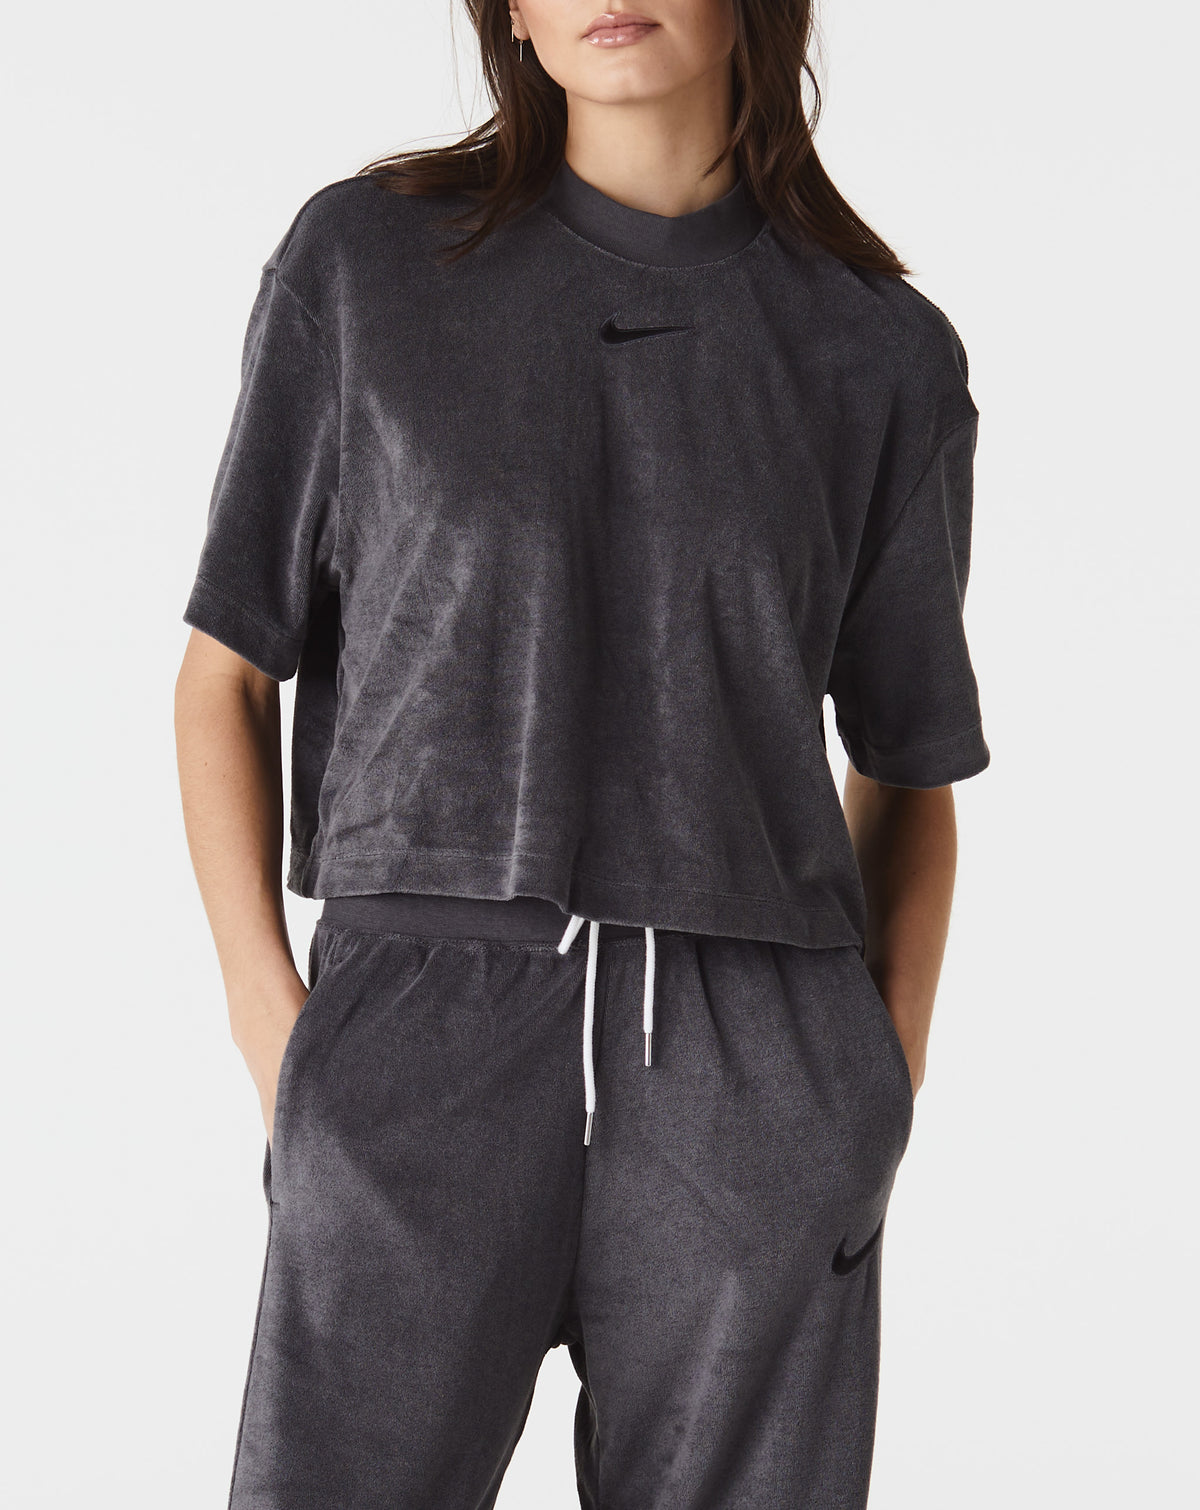 Nike Women's Terry Boat Neck Top - Rule of Next Apparel